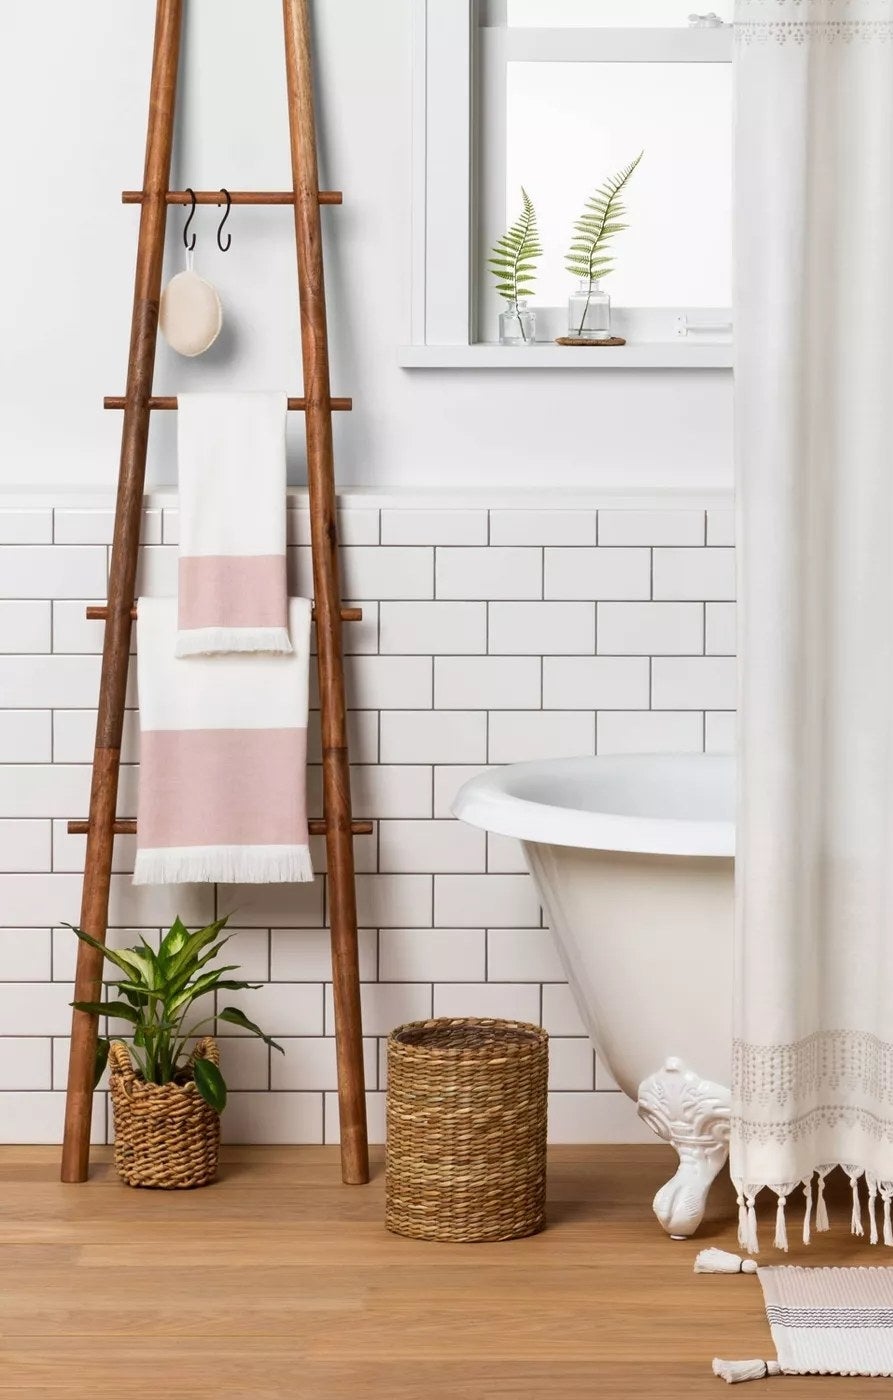 The ladder with four rungs holding towels in a bathroom